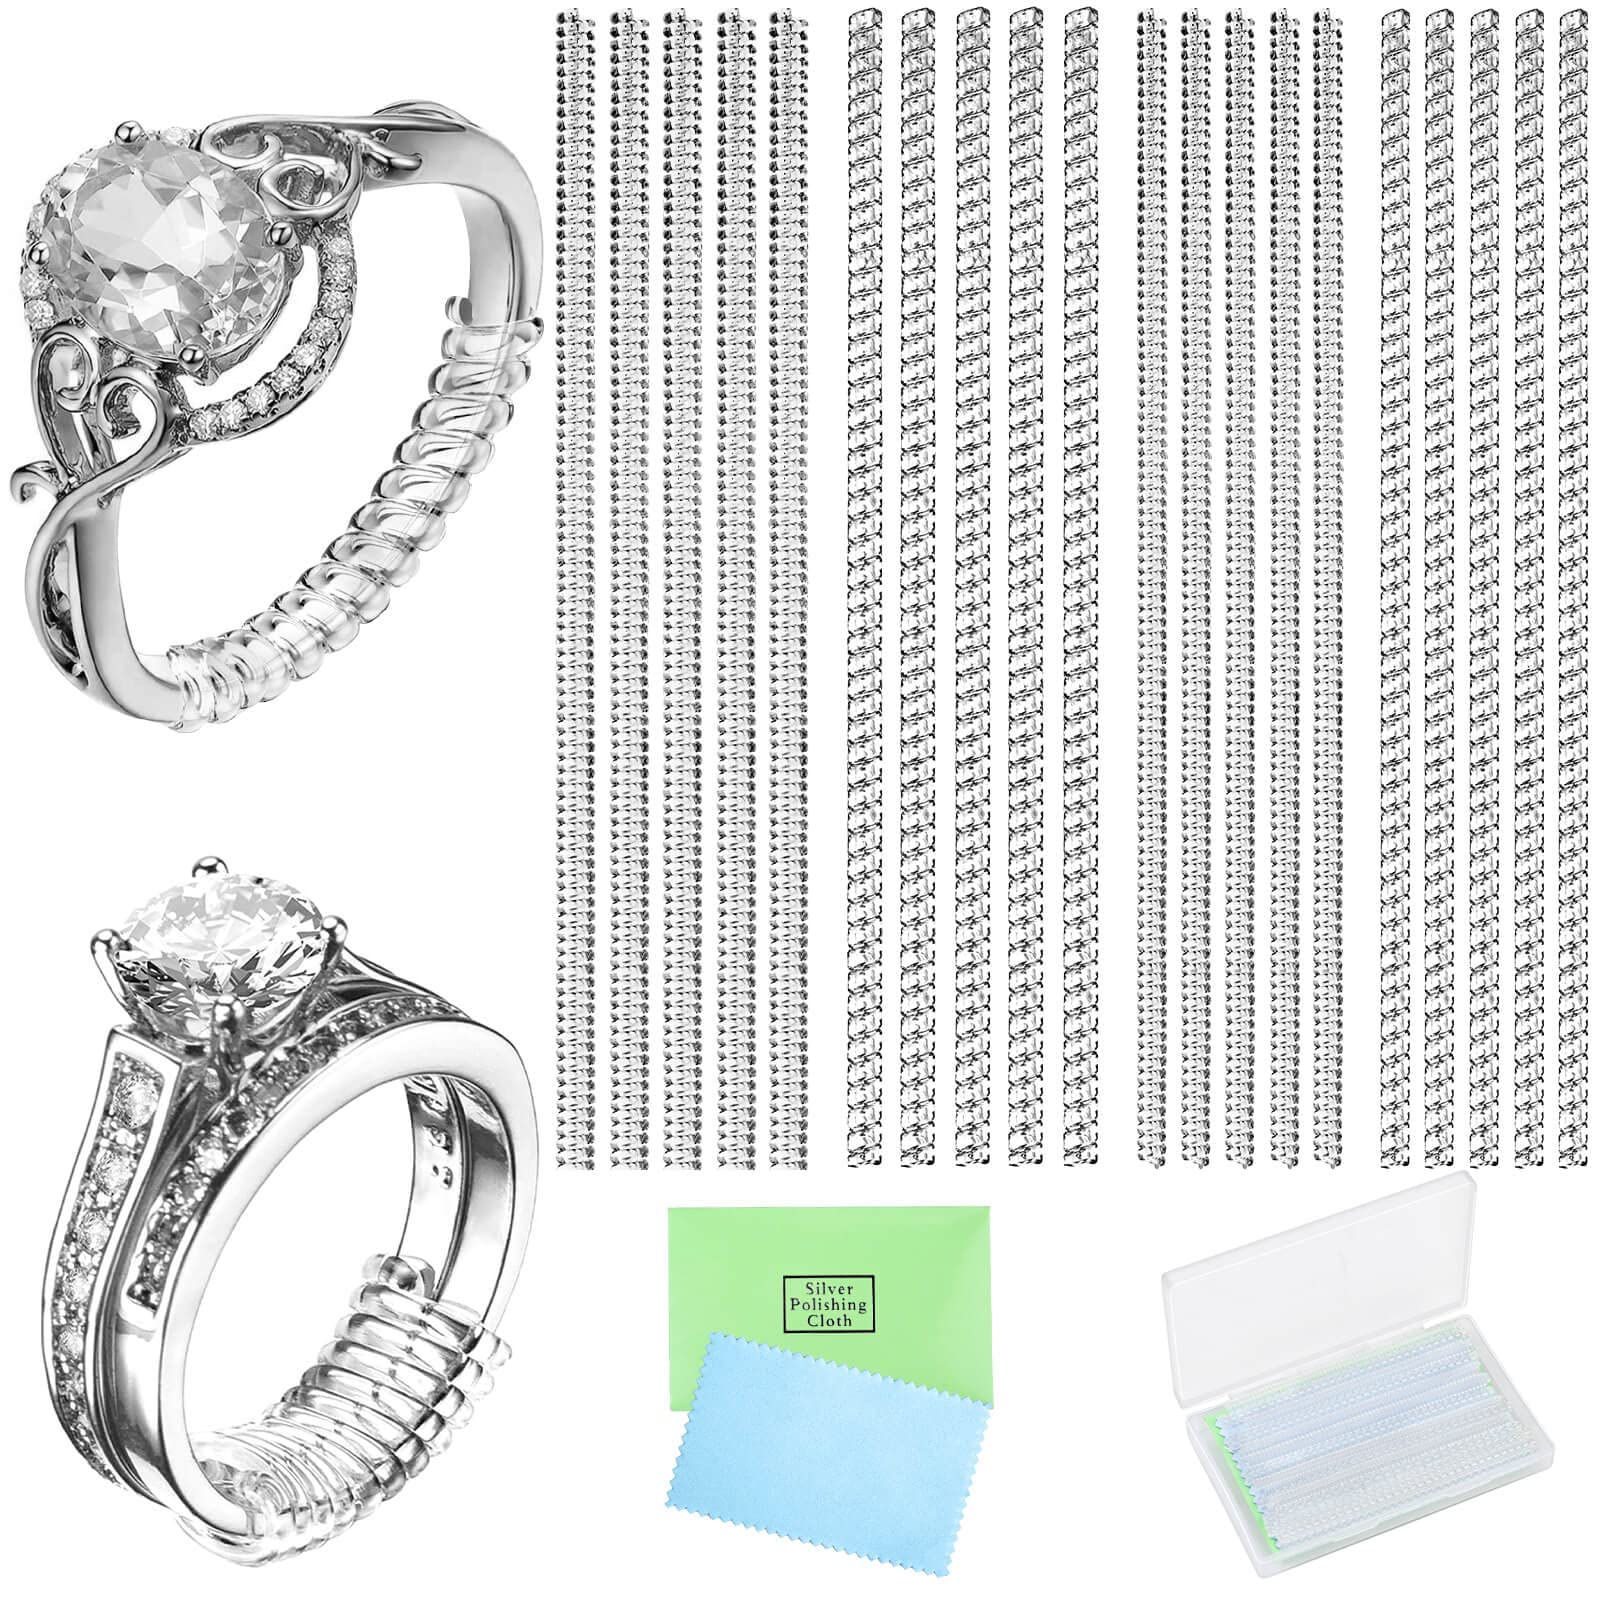 GWHOLE Ring Size Adjuster with Silver Polishing Cloth,Set of 4 (2mm/3mm)